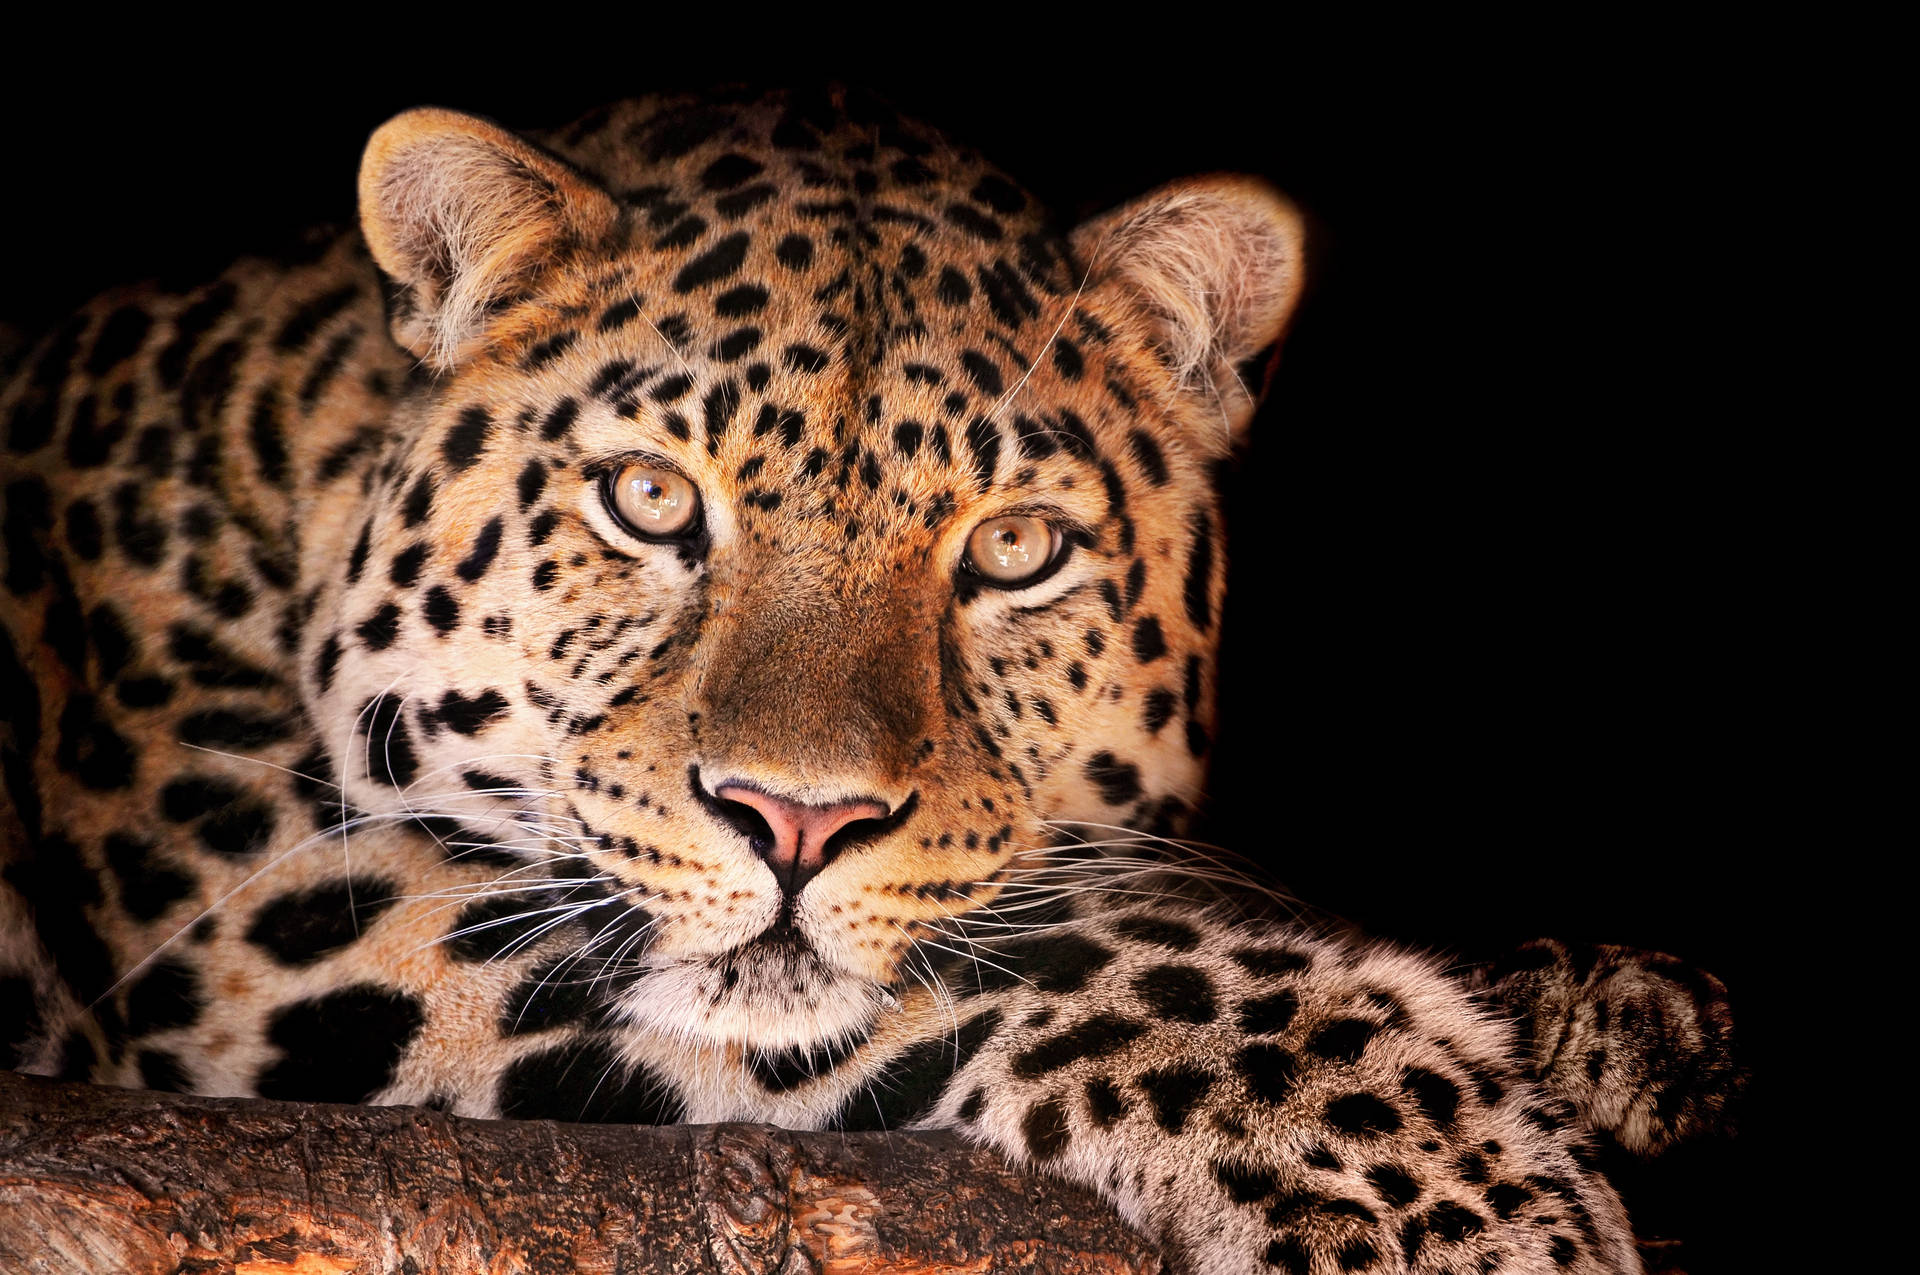 Leopard 4206X2793 Wallpaper and Background Image